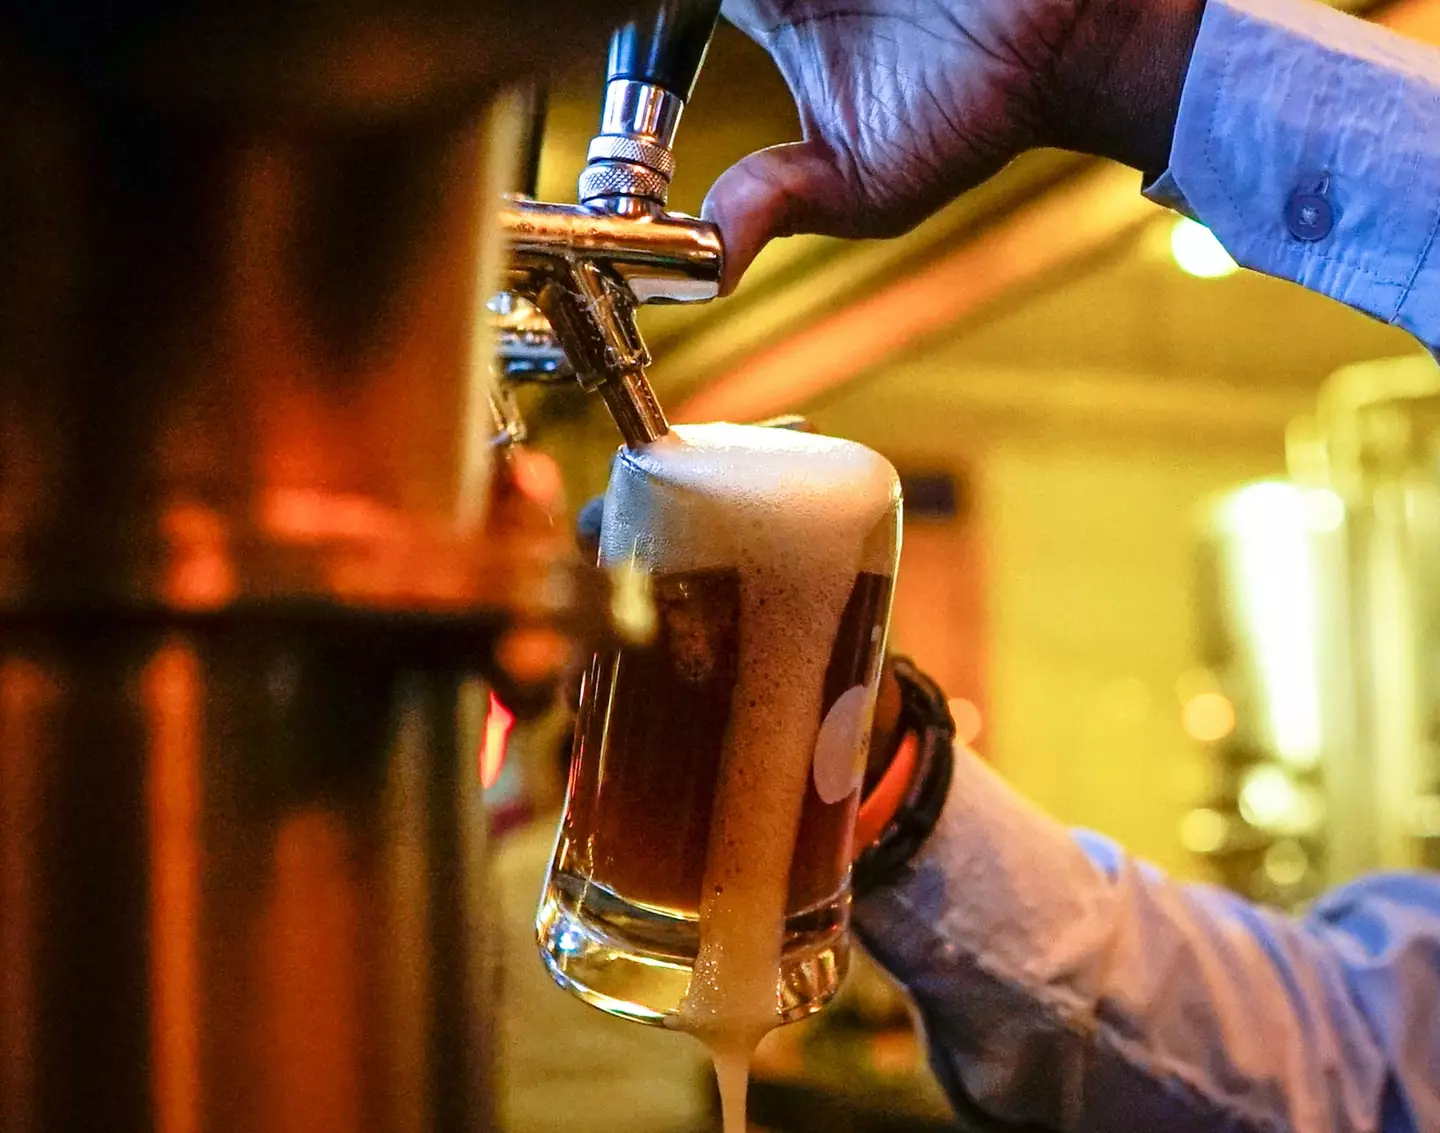 A beer will set you back at this year's Super Bowl.